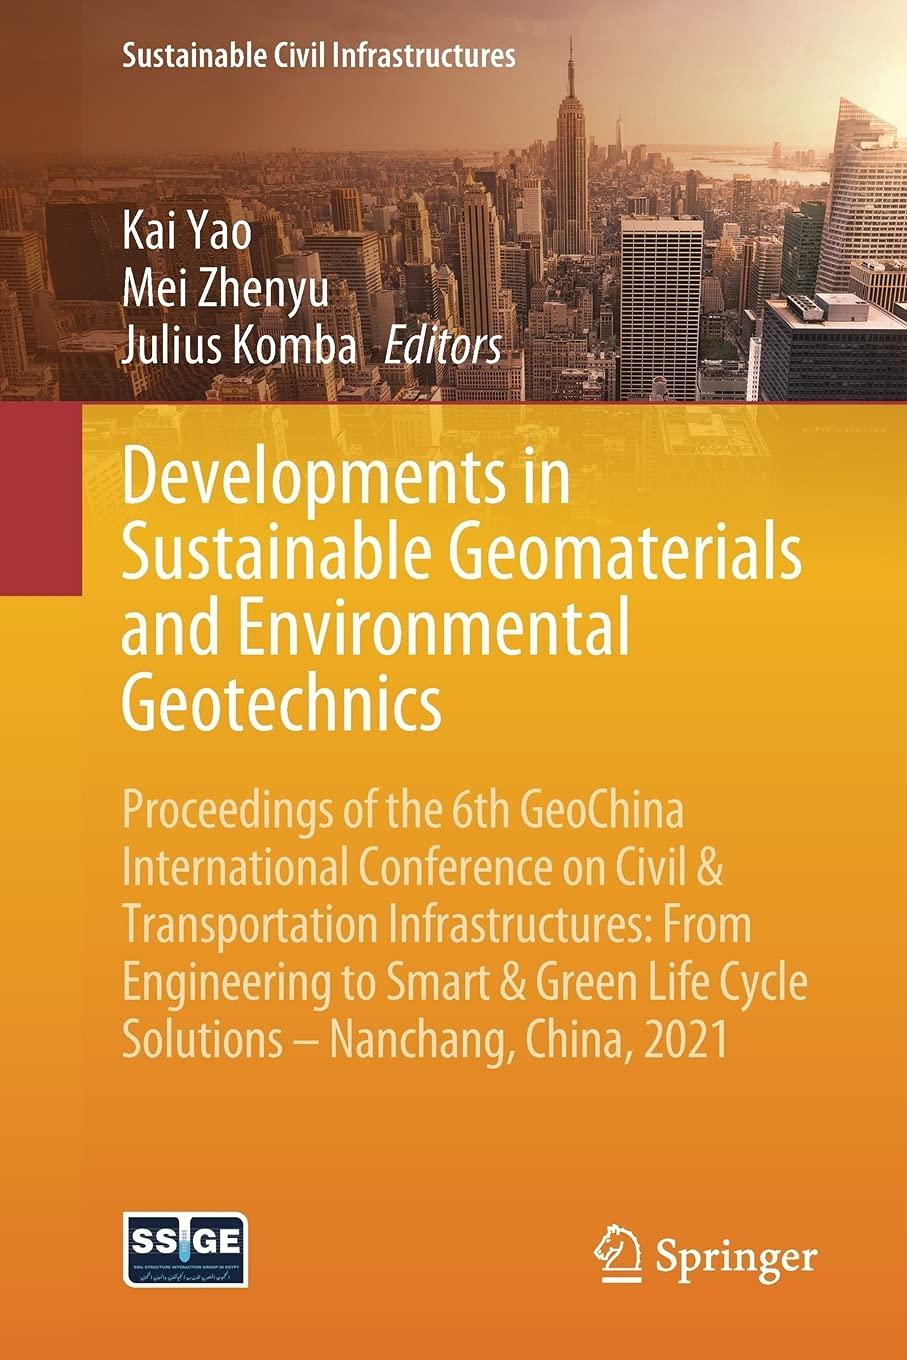 Developments In Sustainable Geomaterials And Environmental Geotechnics Proceedings Of The 6th GeoChina International Conference On Civil And Transportation ...Nanchang China 2021